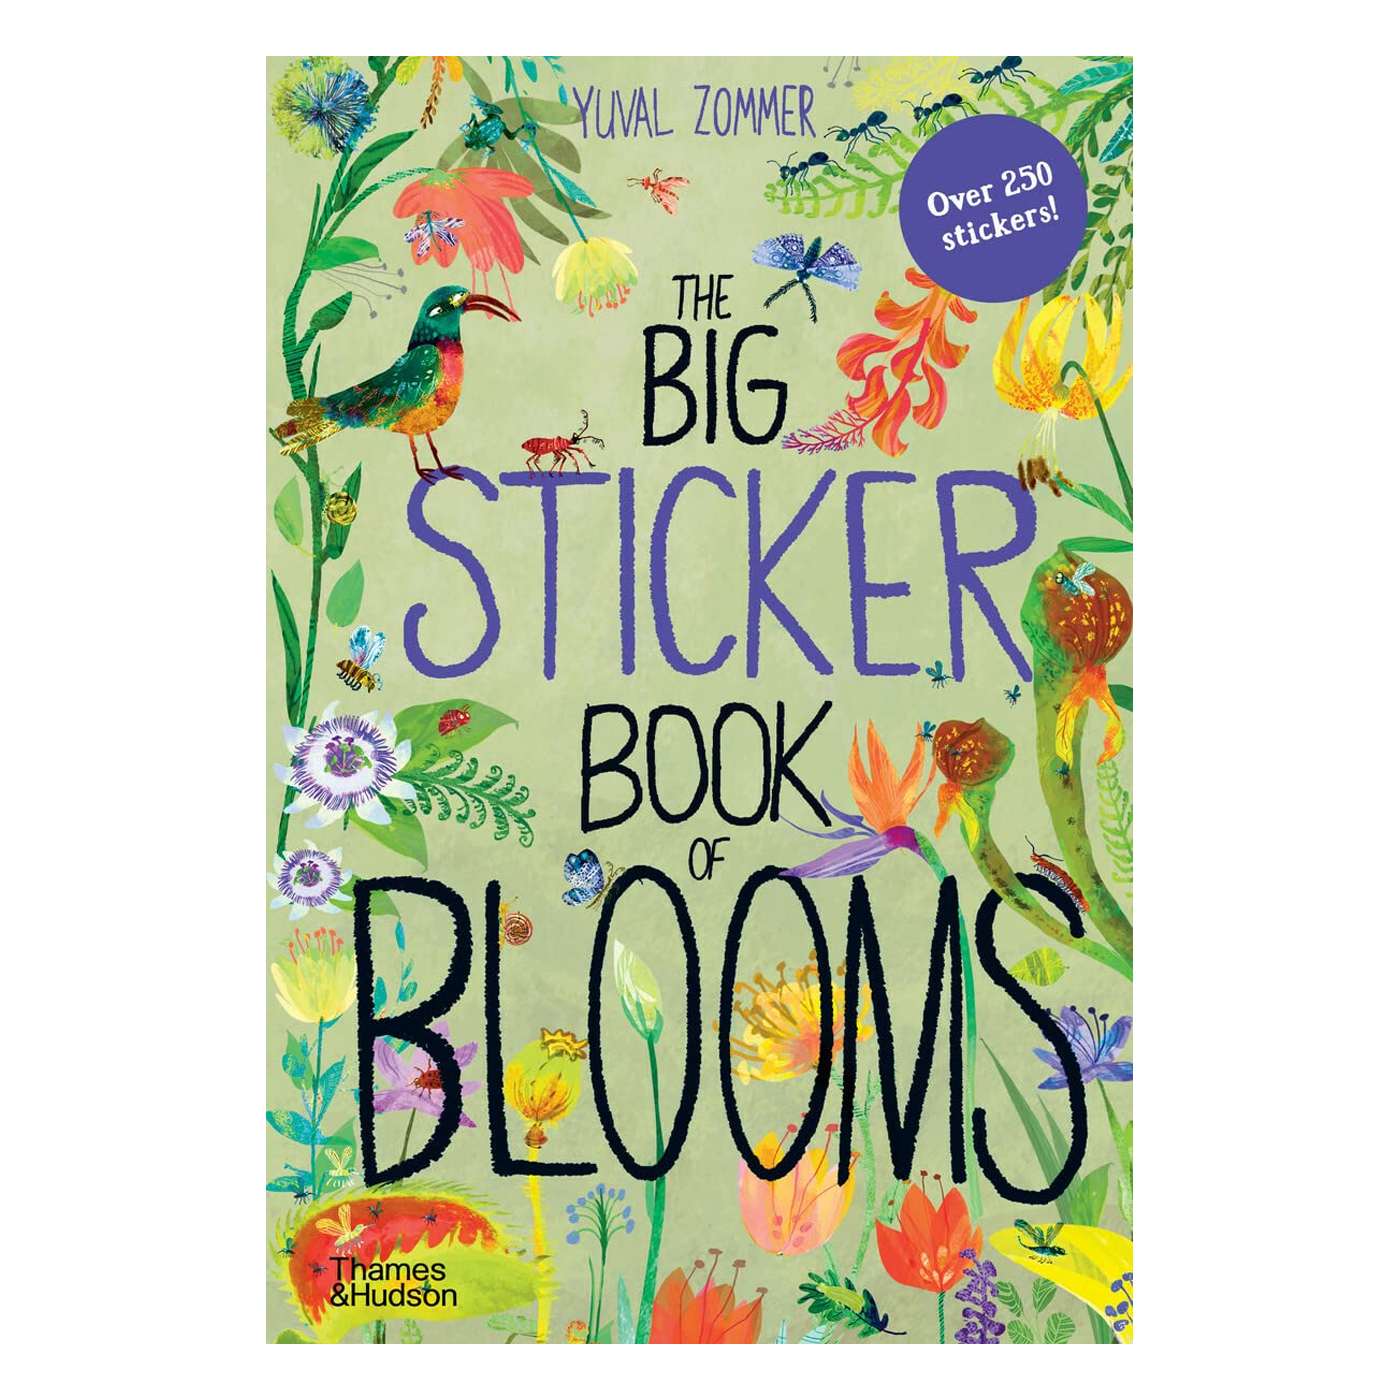 THAMES & HUDSON The Big Sticker Book of Blooms